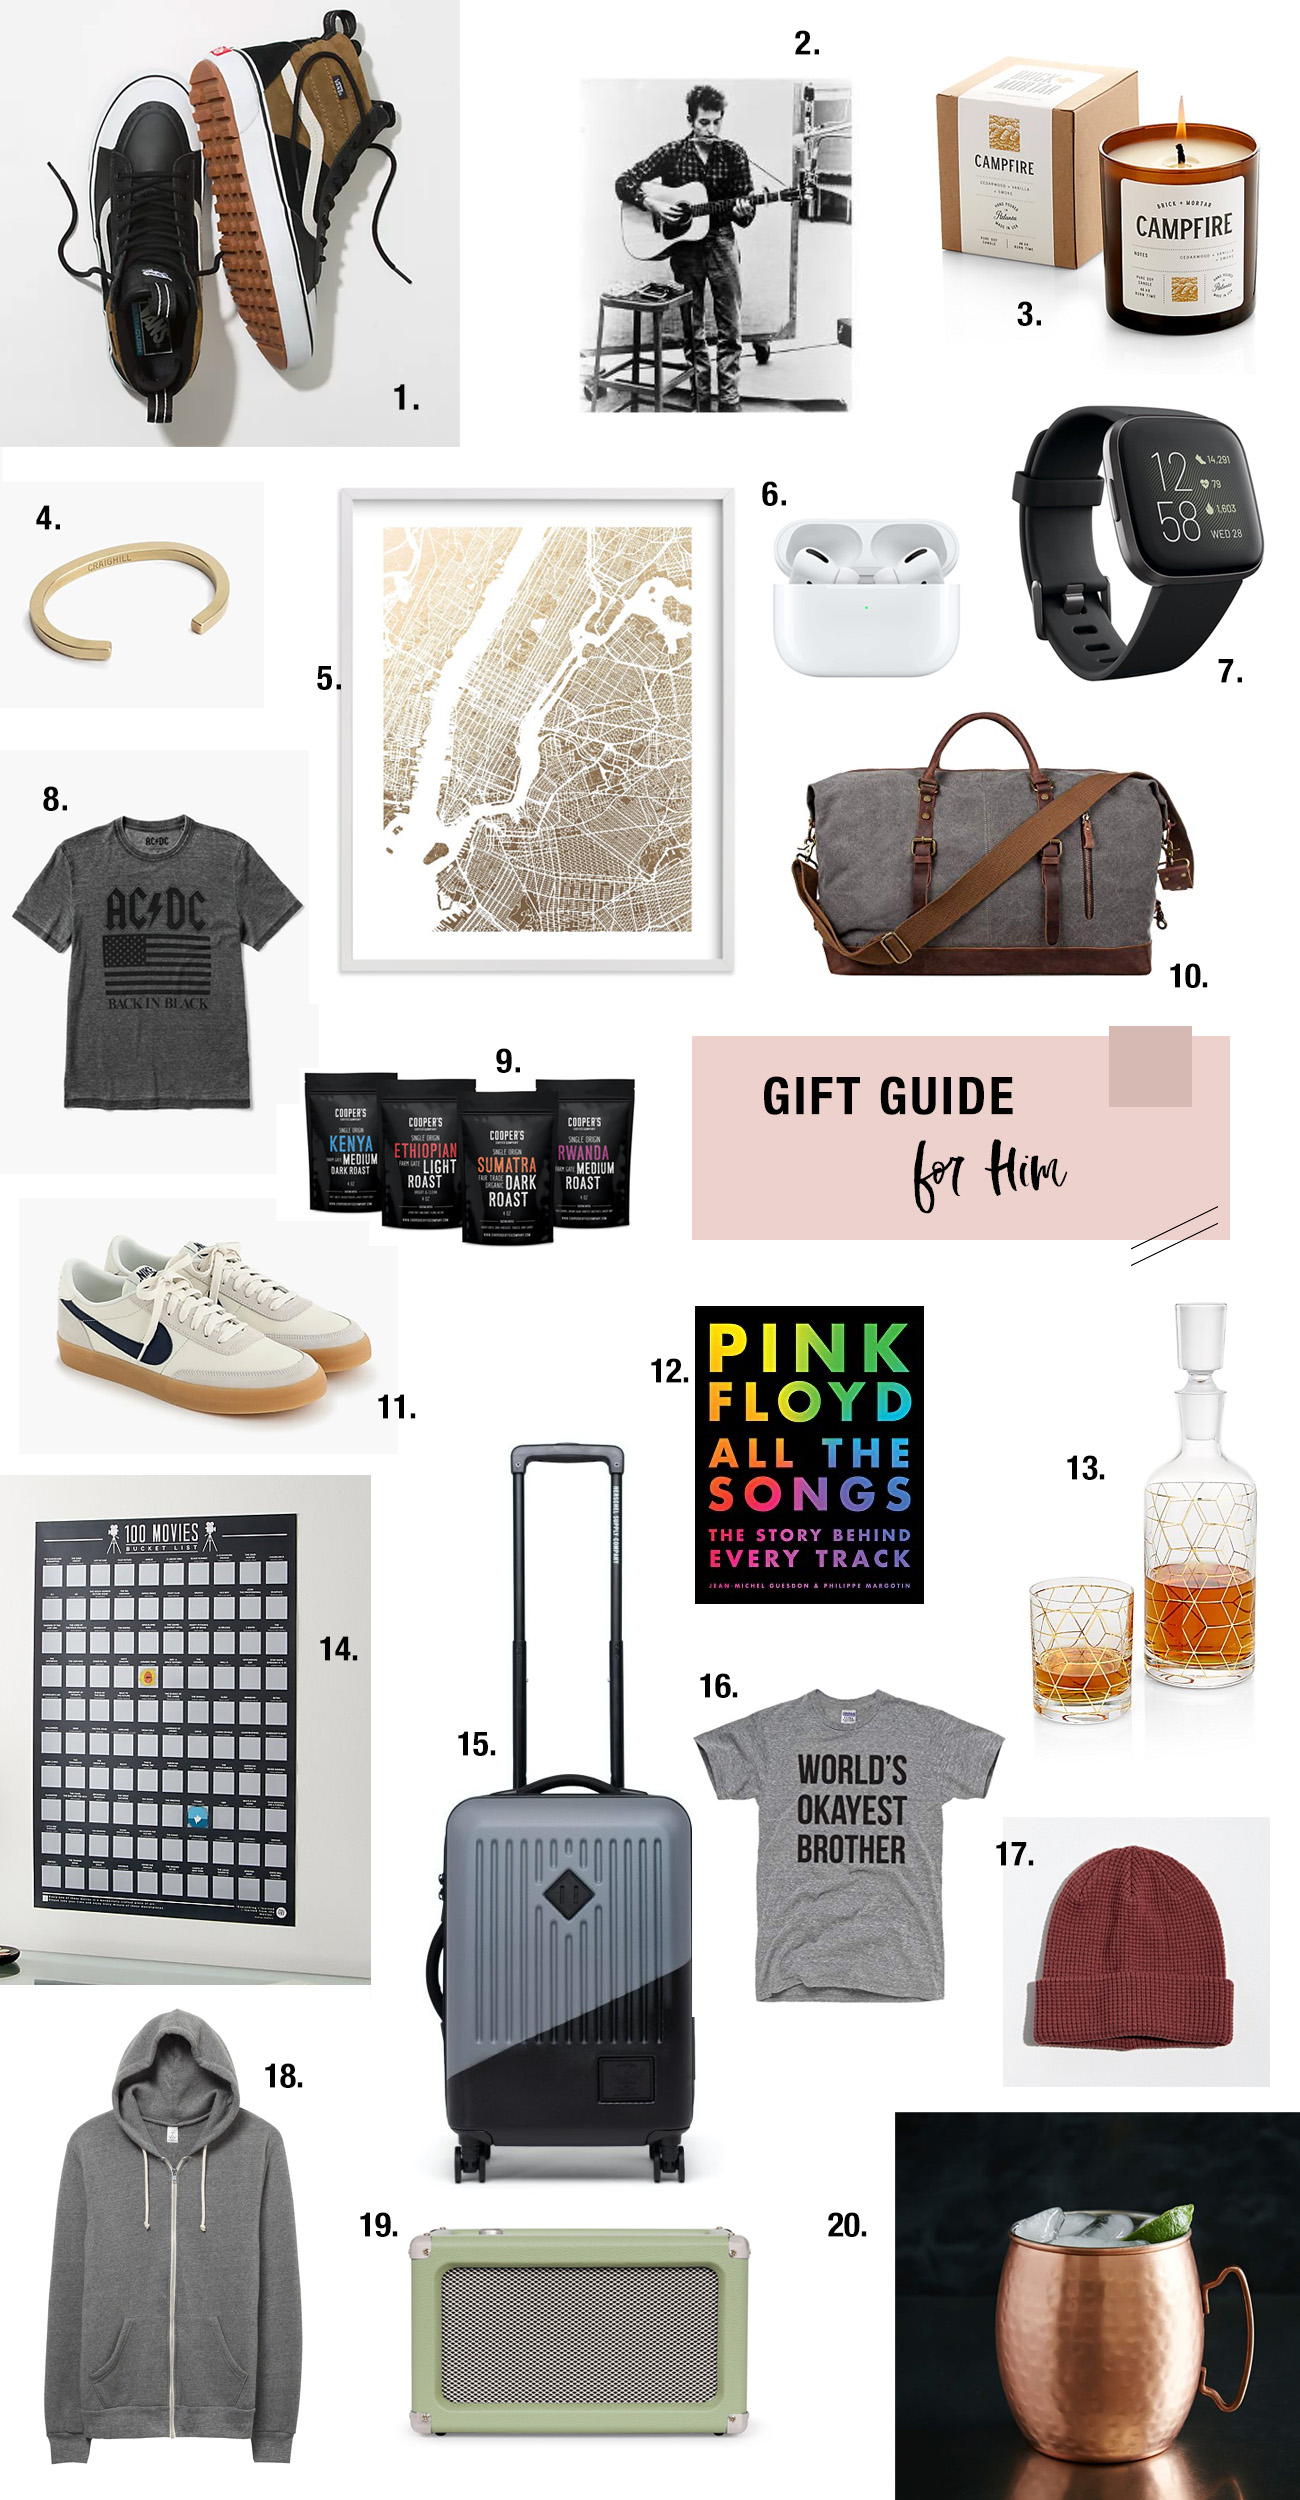 Gift Guide for HIm